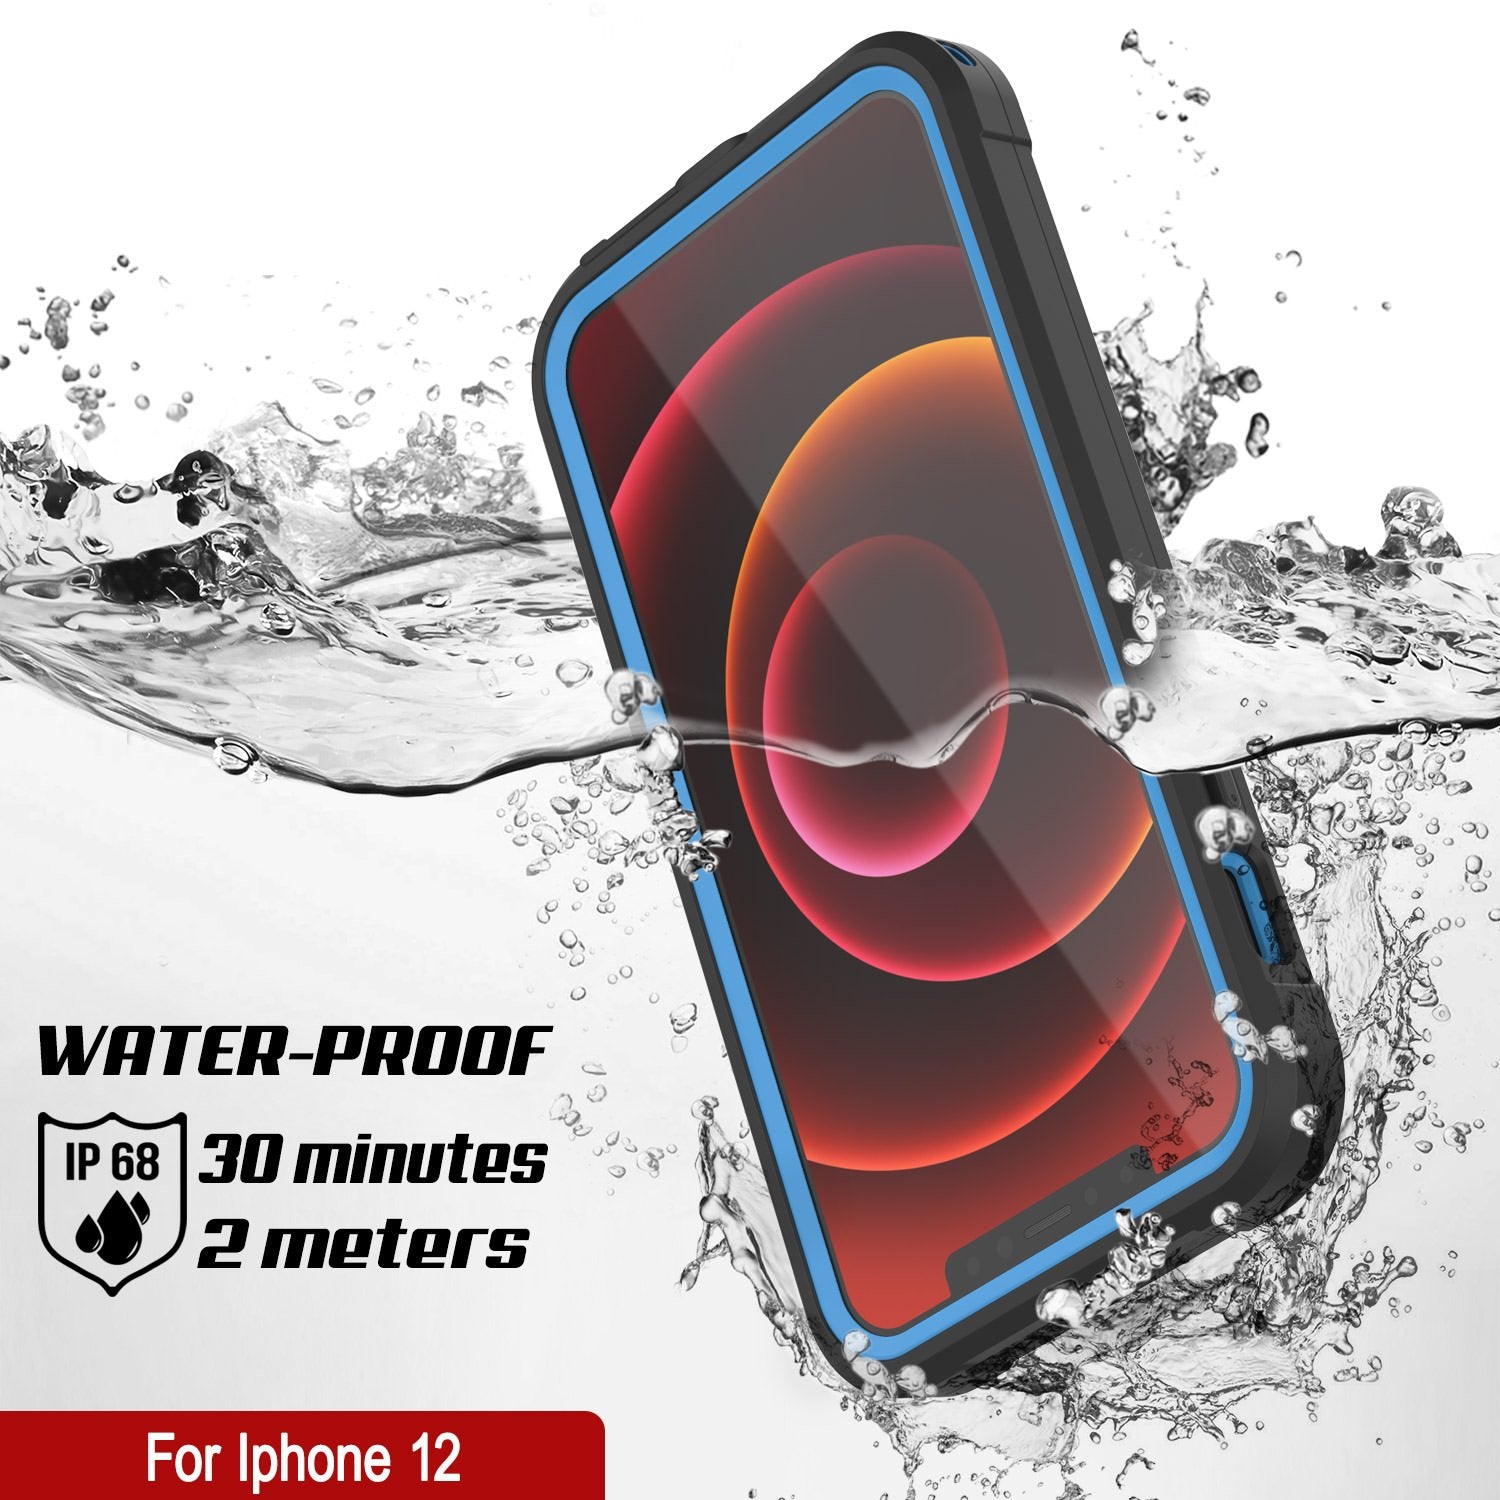 iPhone 12 Waterproof IP68 Case, Punkcase [Blue]  [Maximus Series] [Slim Fit] [IP68 Certified] [Shockresistant] Clear Armor Cover with Screen Protector | Ultimate Protection